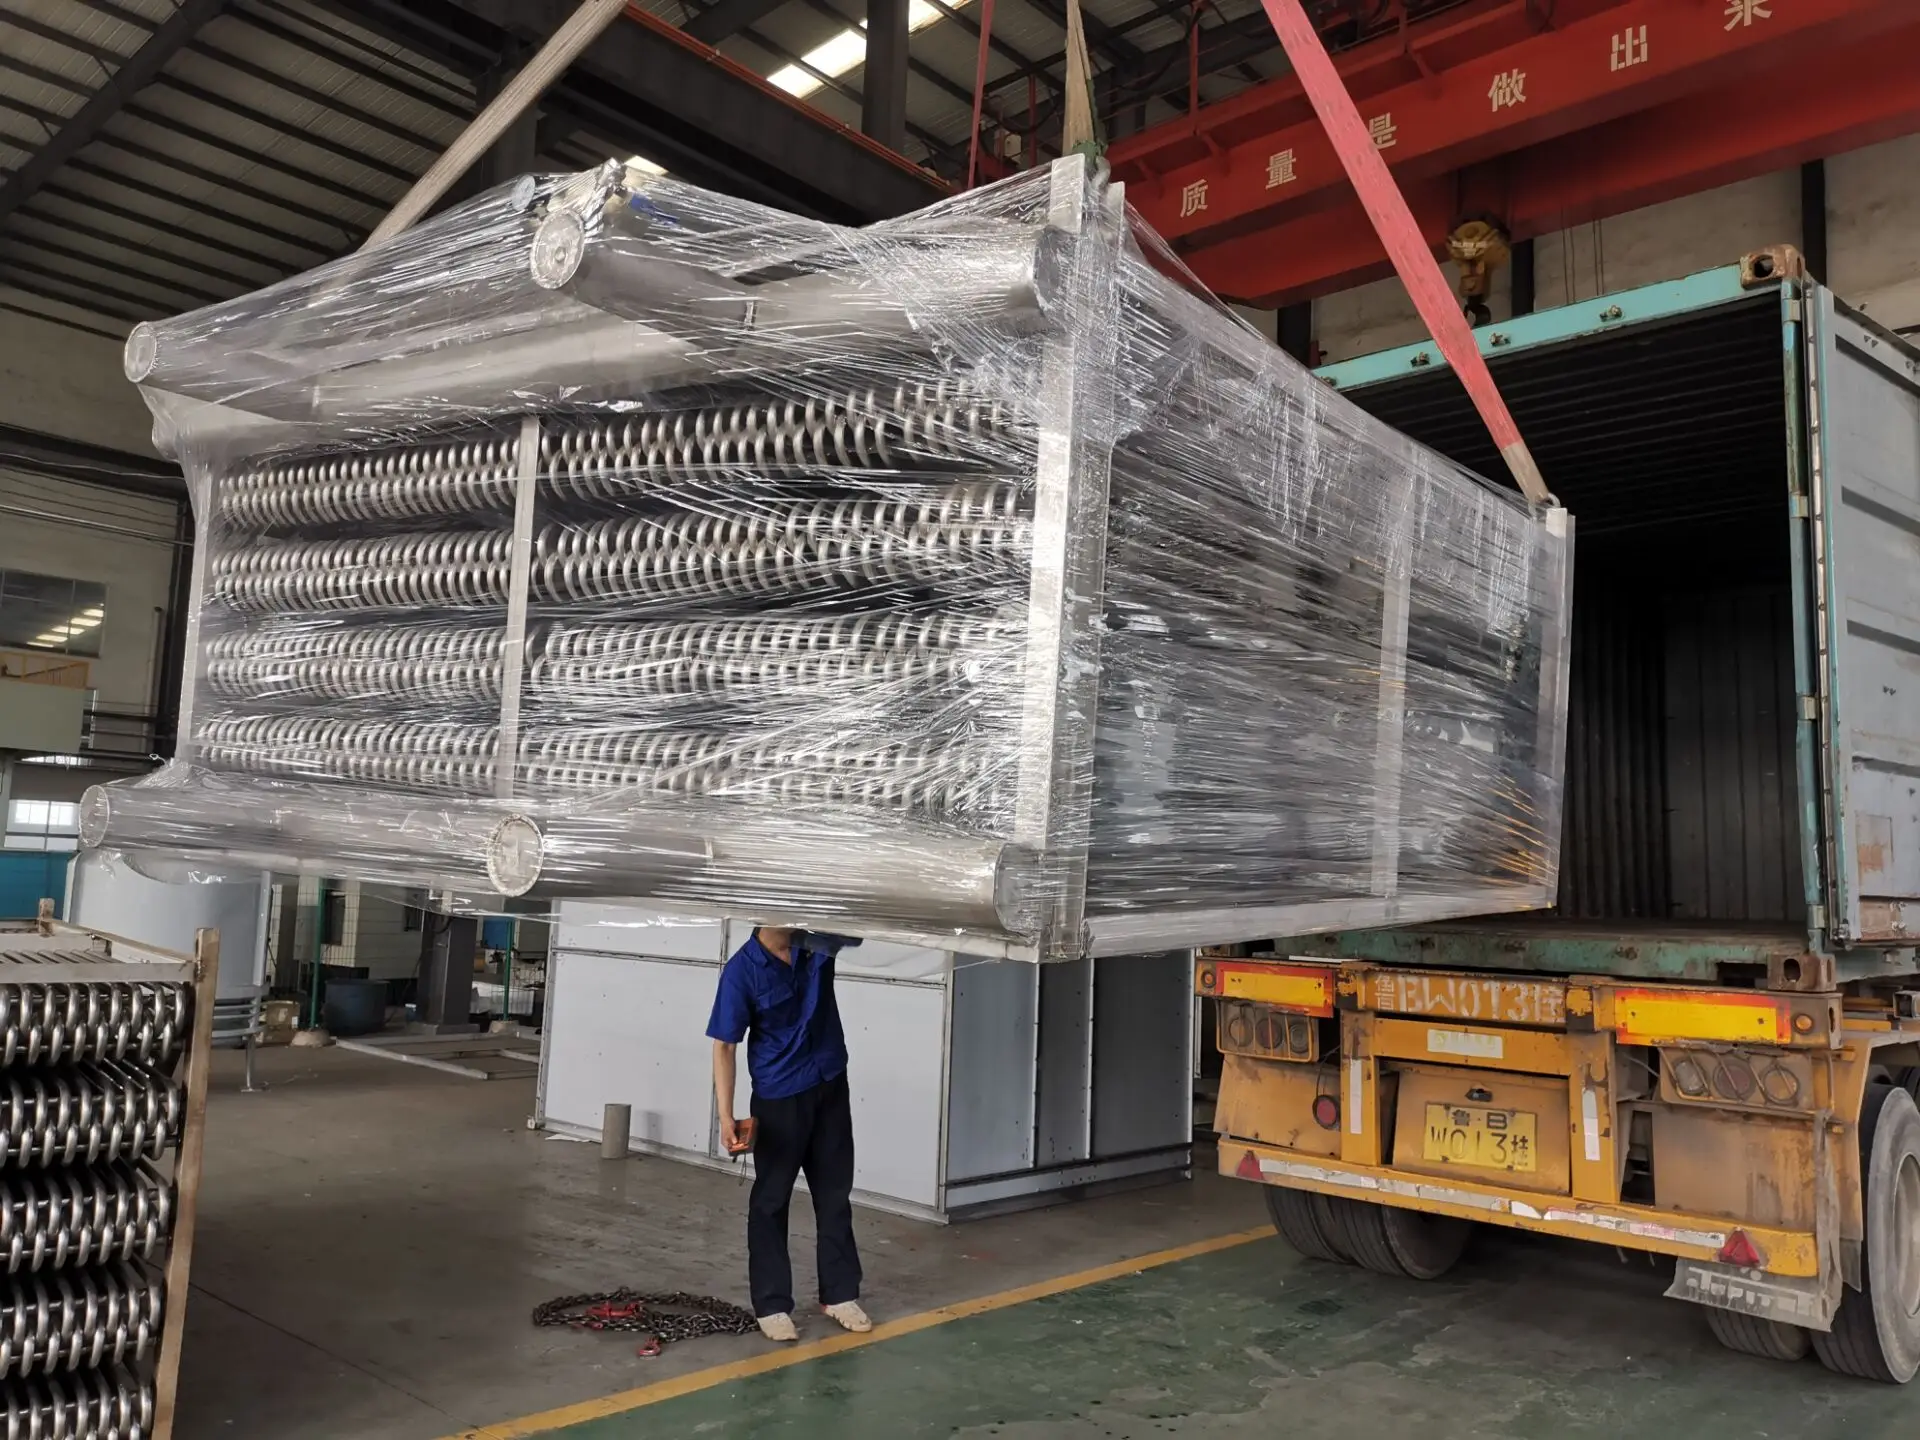 Ss304 Condenser Coils For Closed Cooling Towers - Buy Condenser Coils,Ss304  Condenser Coils,Ss304 Condenser Coils For Closed Cooling Towers Product on  Alibaba.com